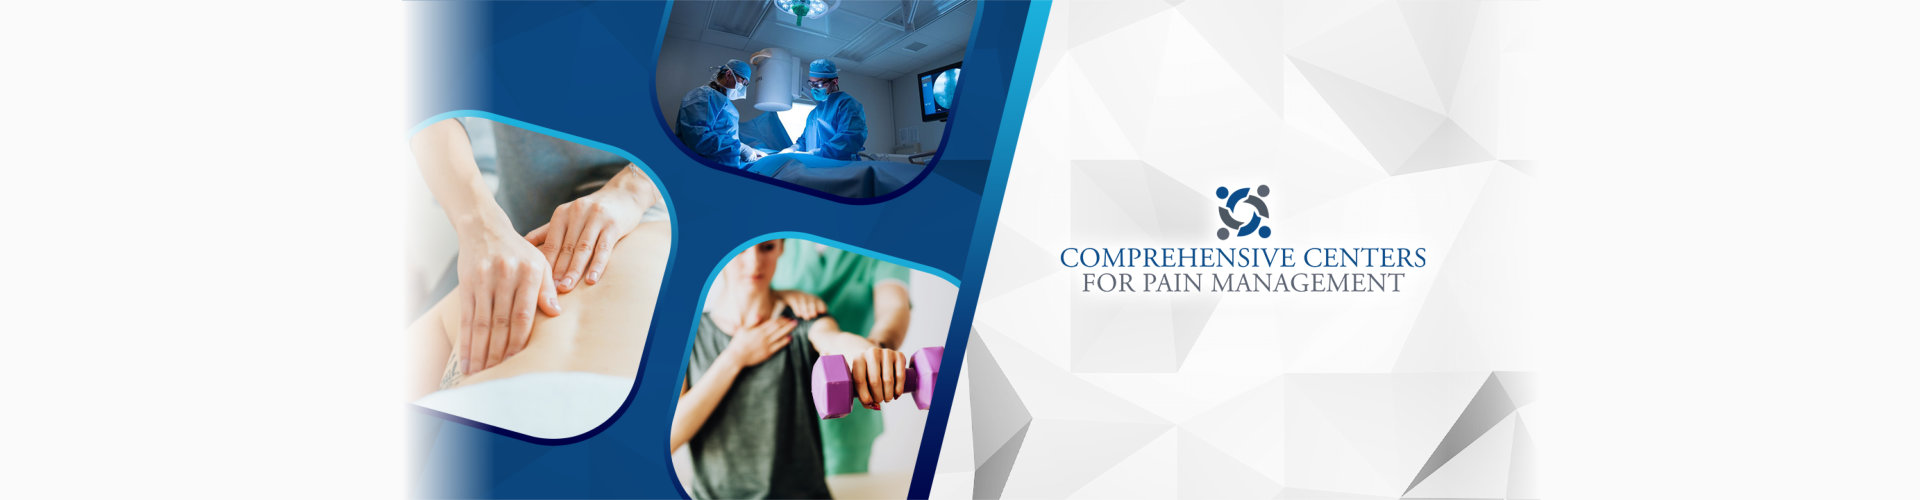 Comprehensive Centers for Pain Management